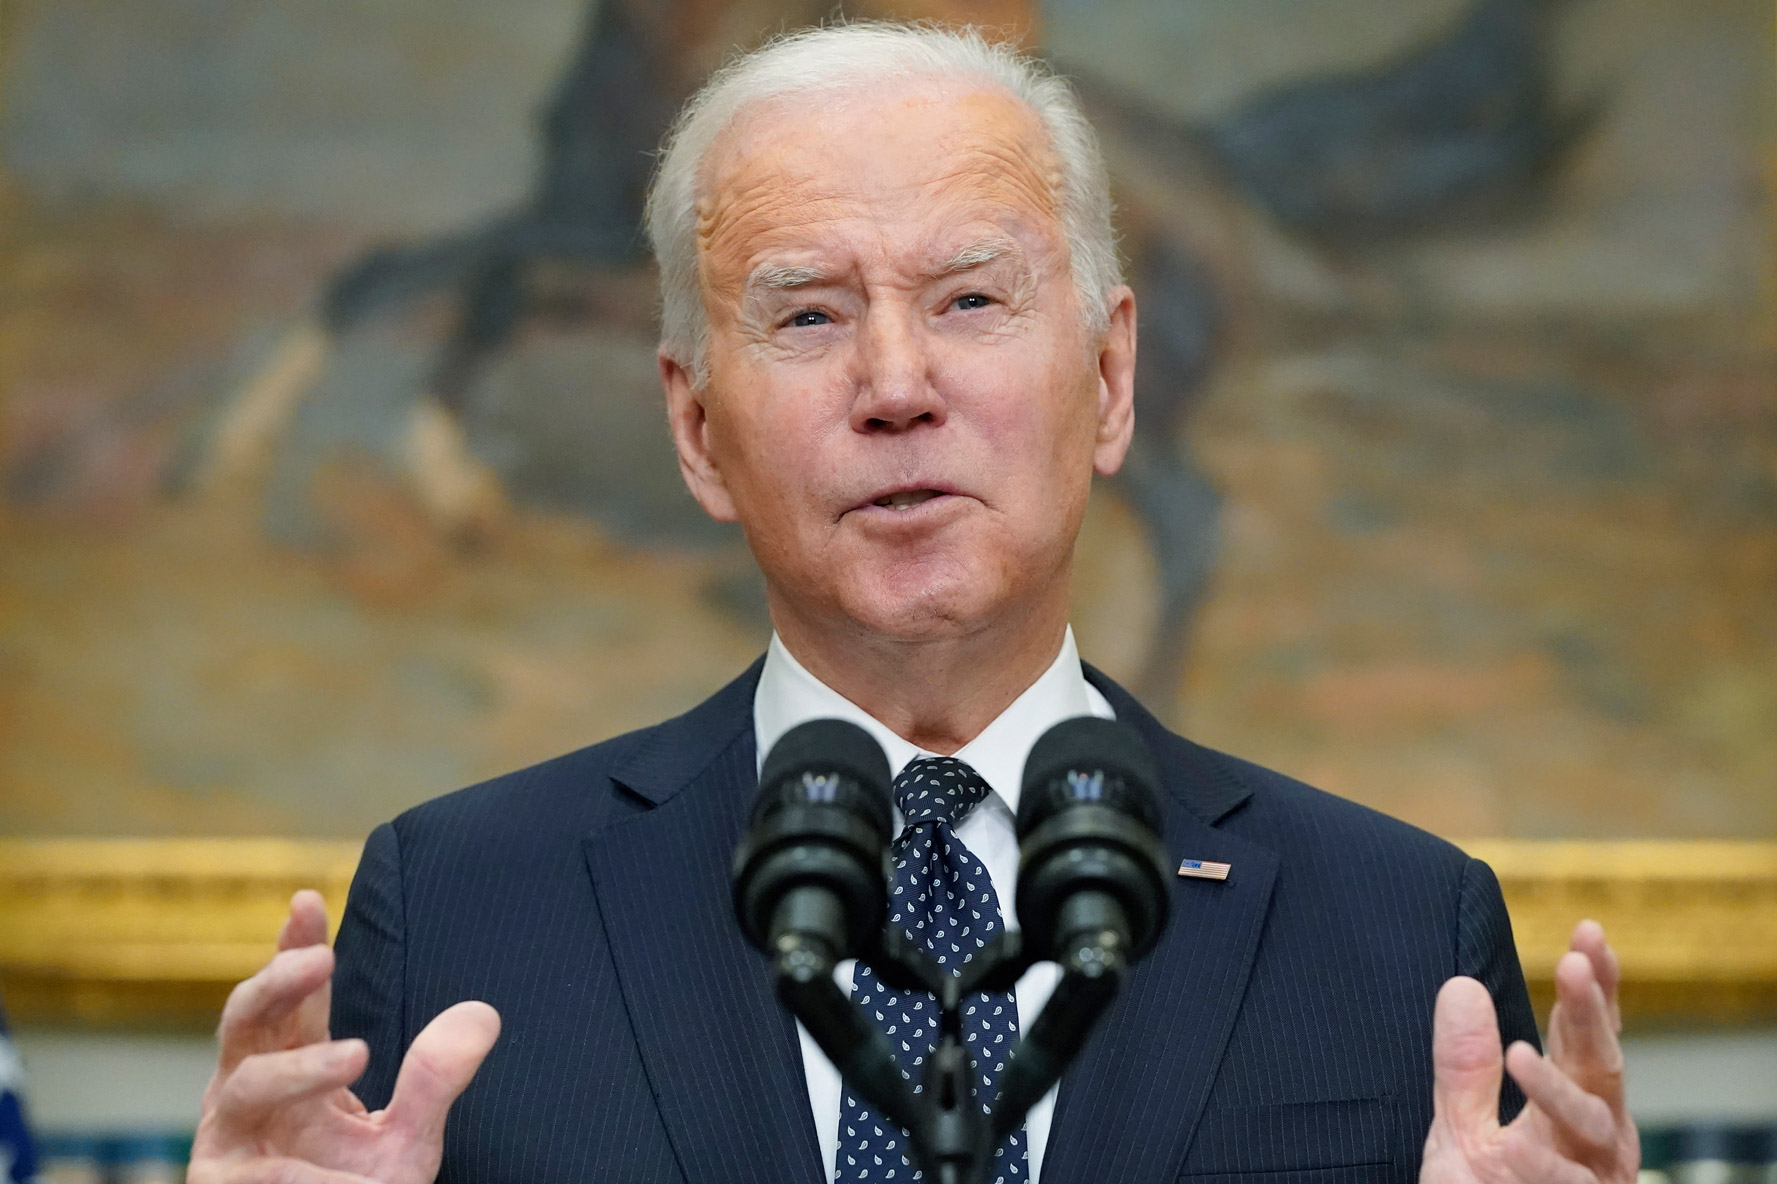 President Biden delivers remarks on Russia and Ukraine from the White House on Feb. 18.